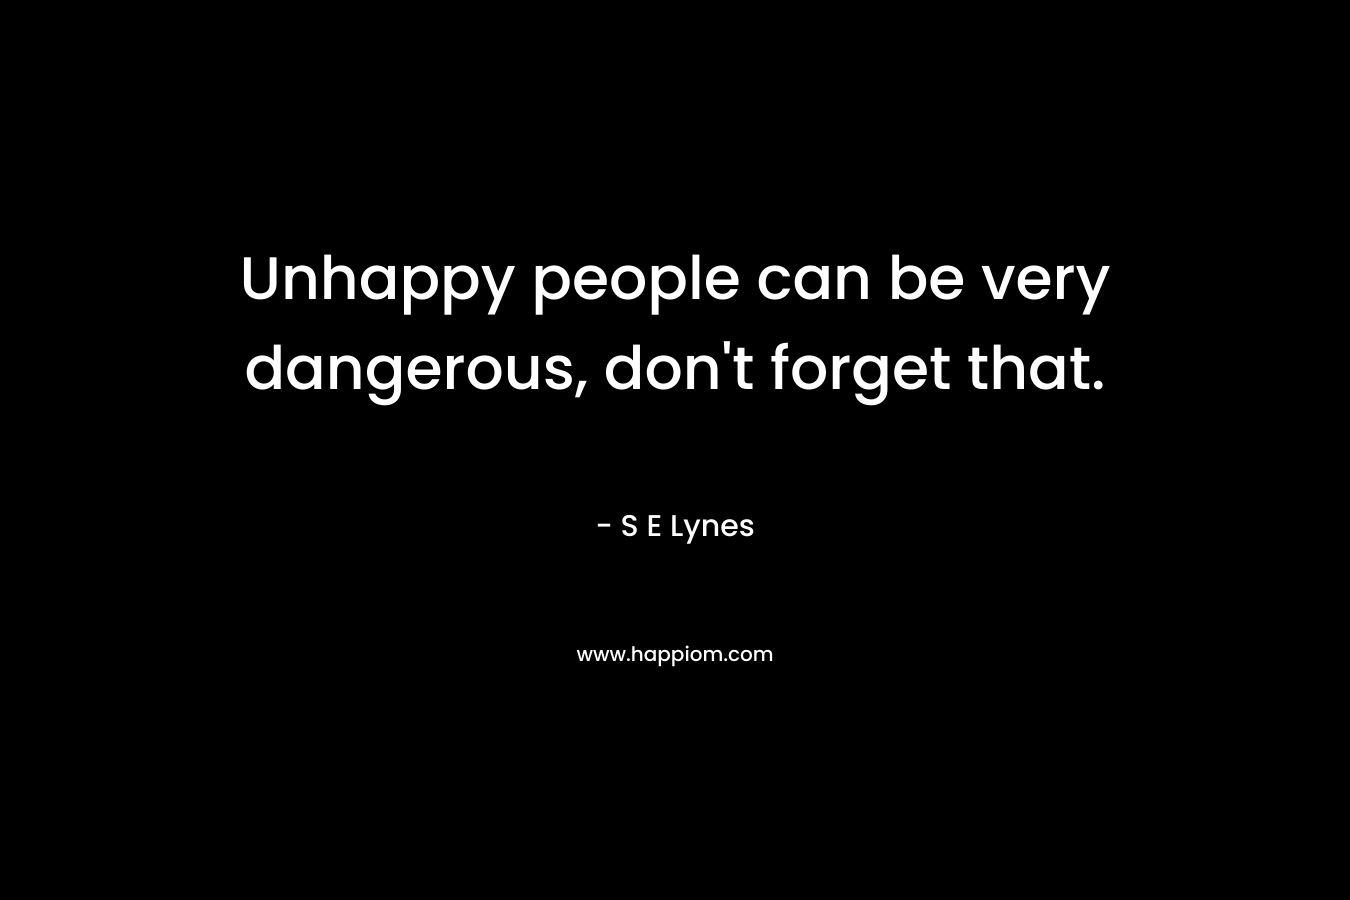 Unhappy people can be very dangerous, don't forget that.